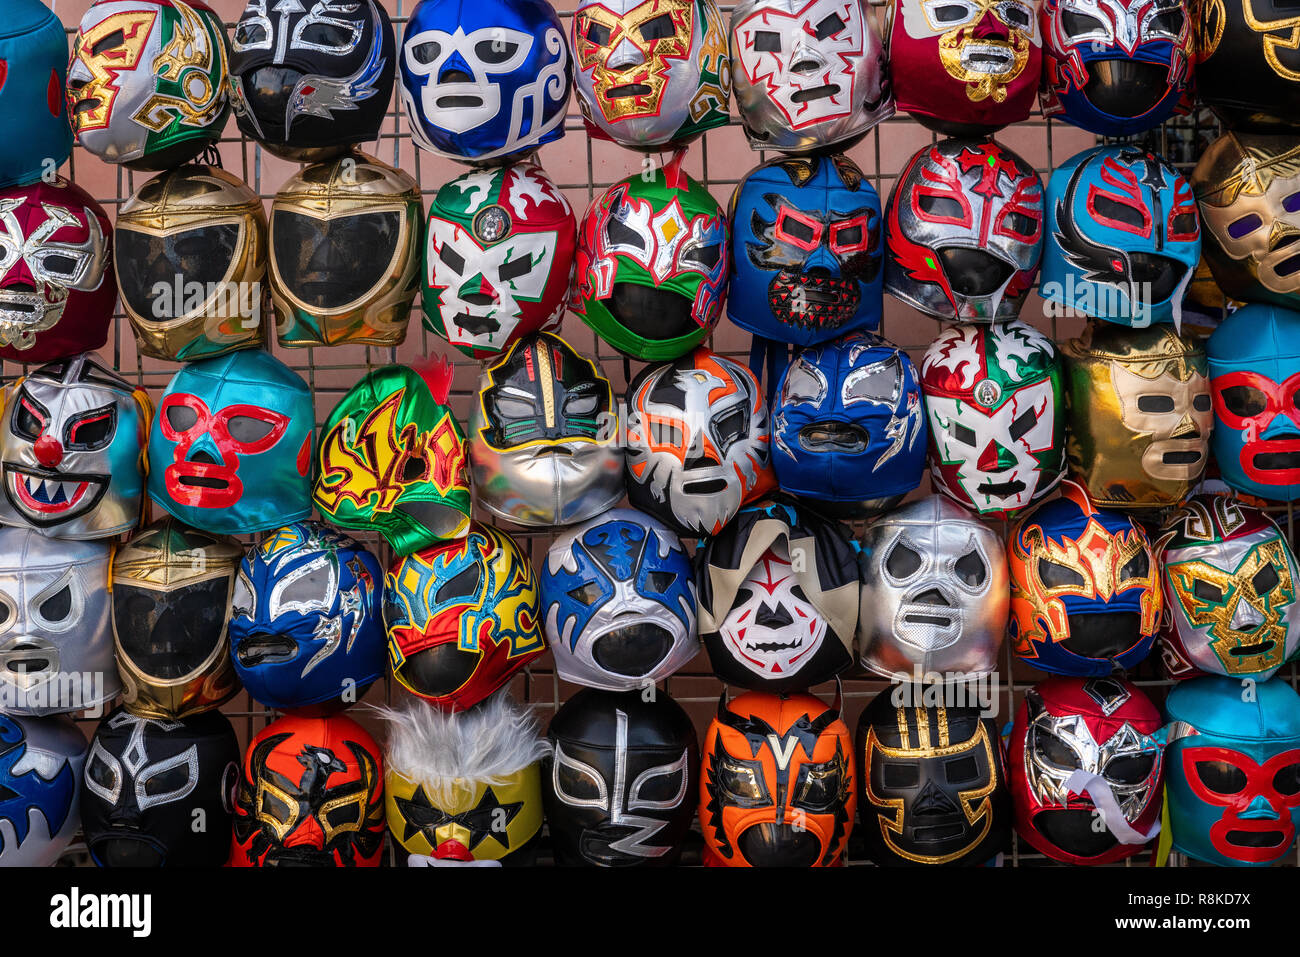 Lucha Libre wrestling masks on display for sale on the street in San Francisco, California. Stock Photo